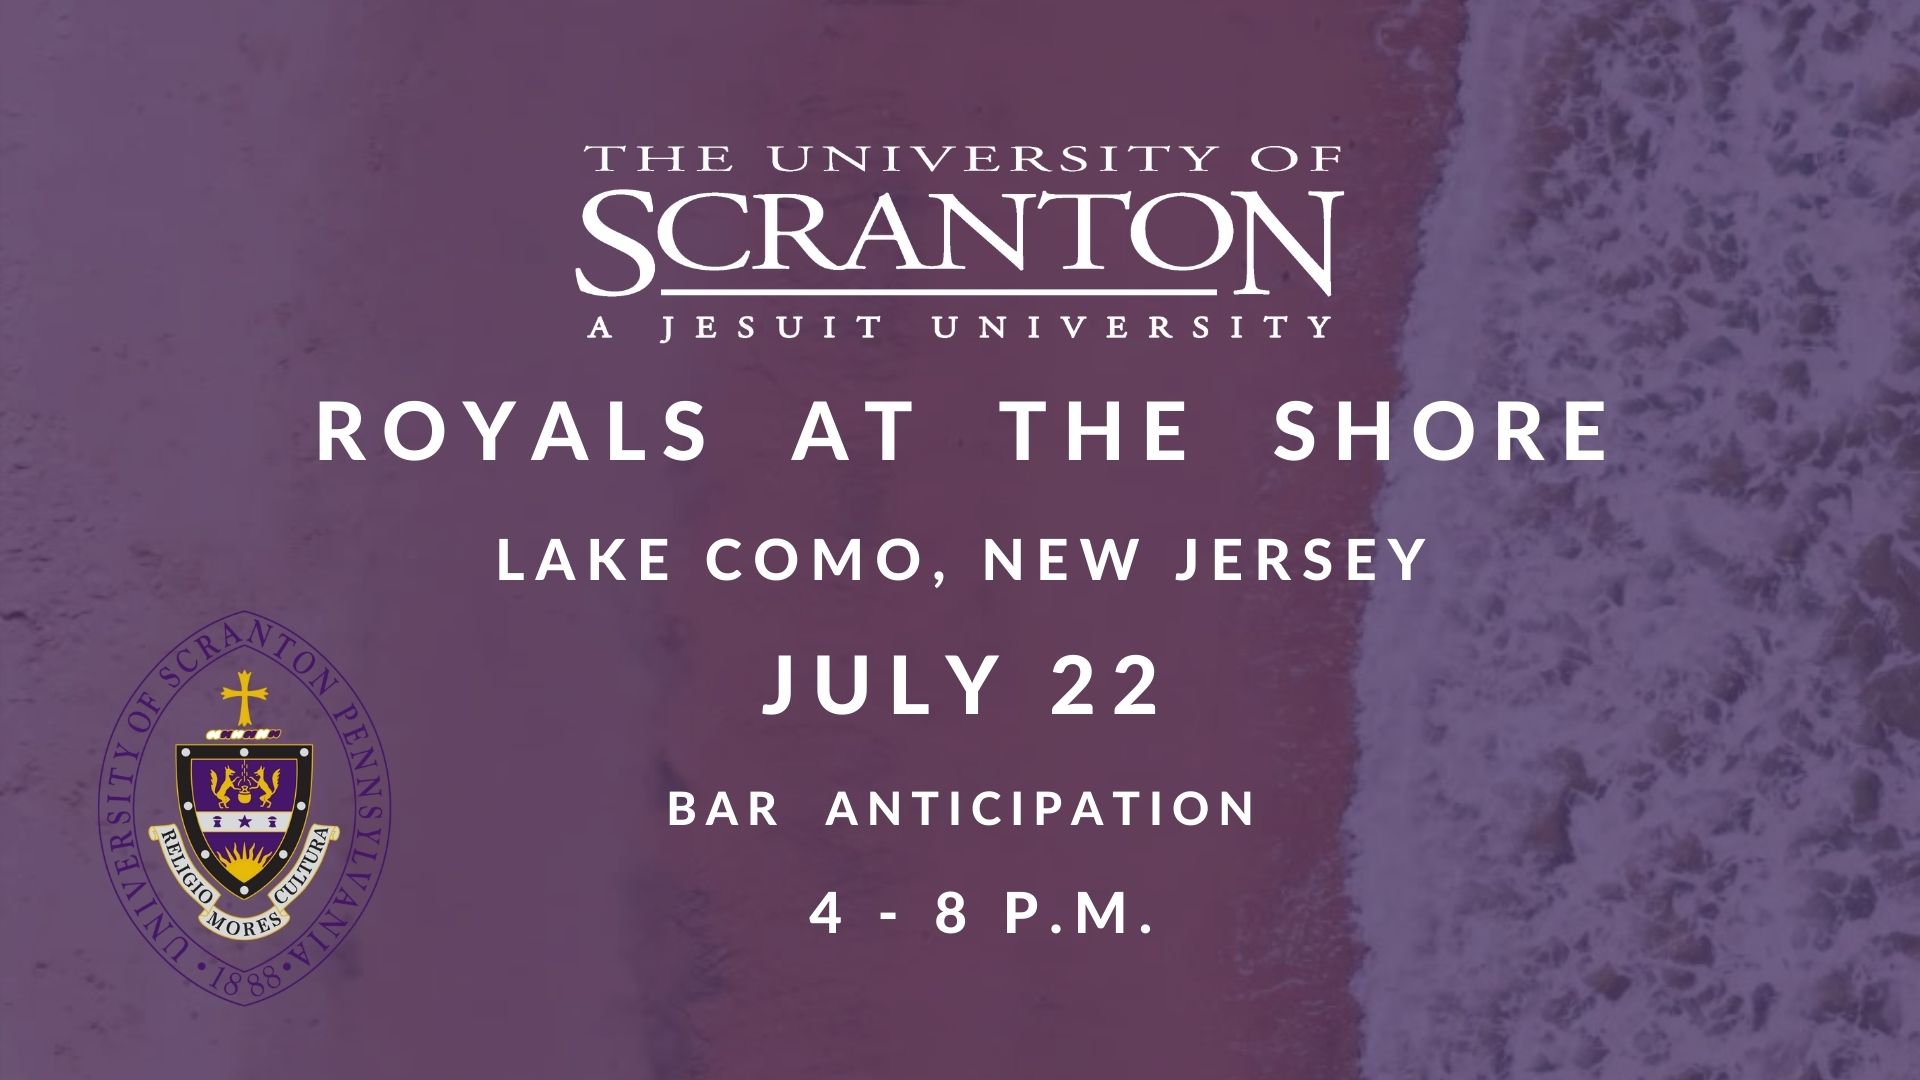 University of Scranton seal and wordmark superimposed over an image of a coastline with text advertising Royals At The Shore July 22.